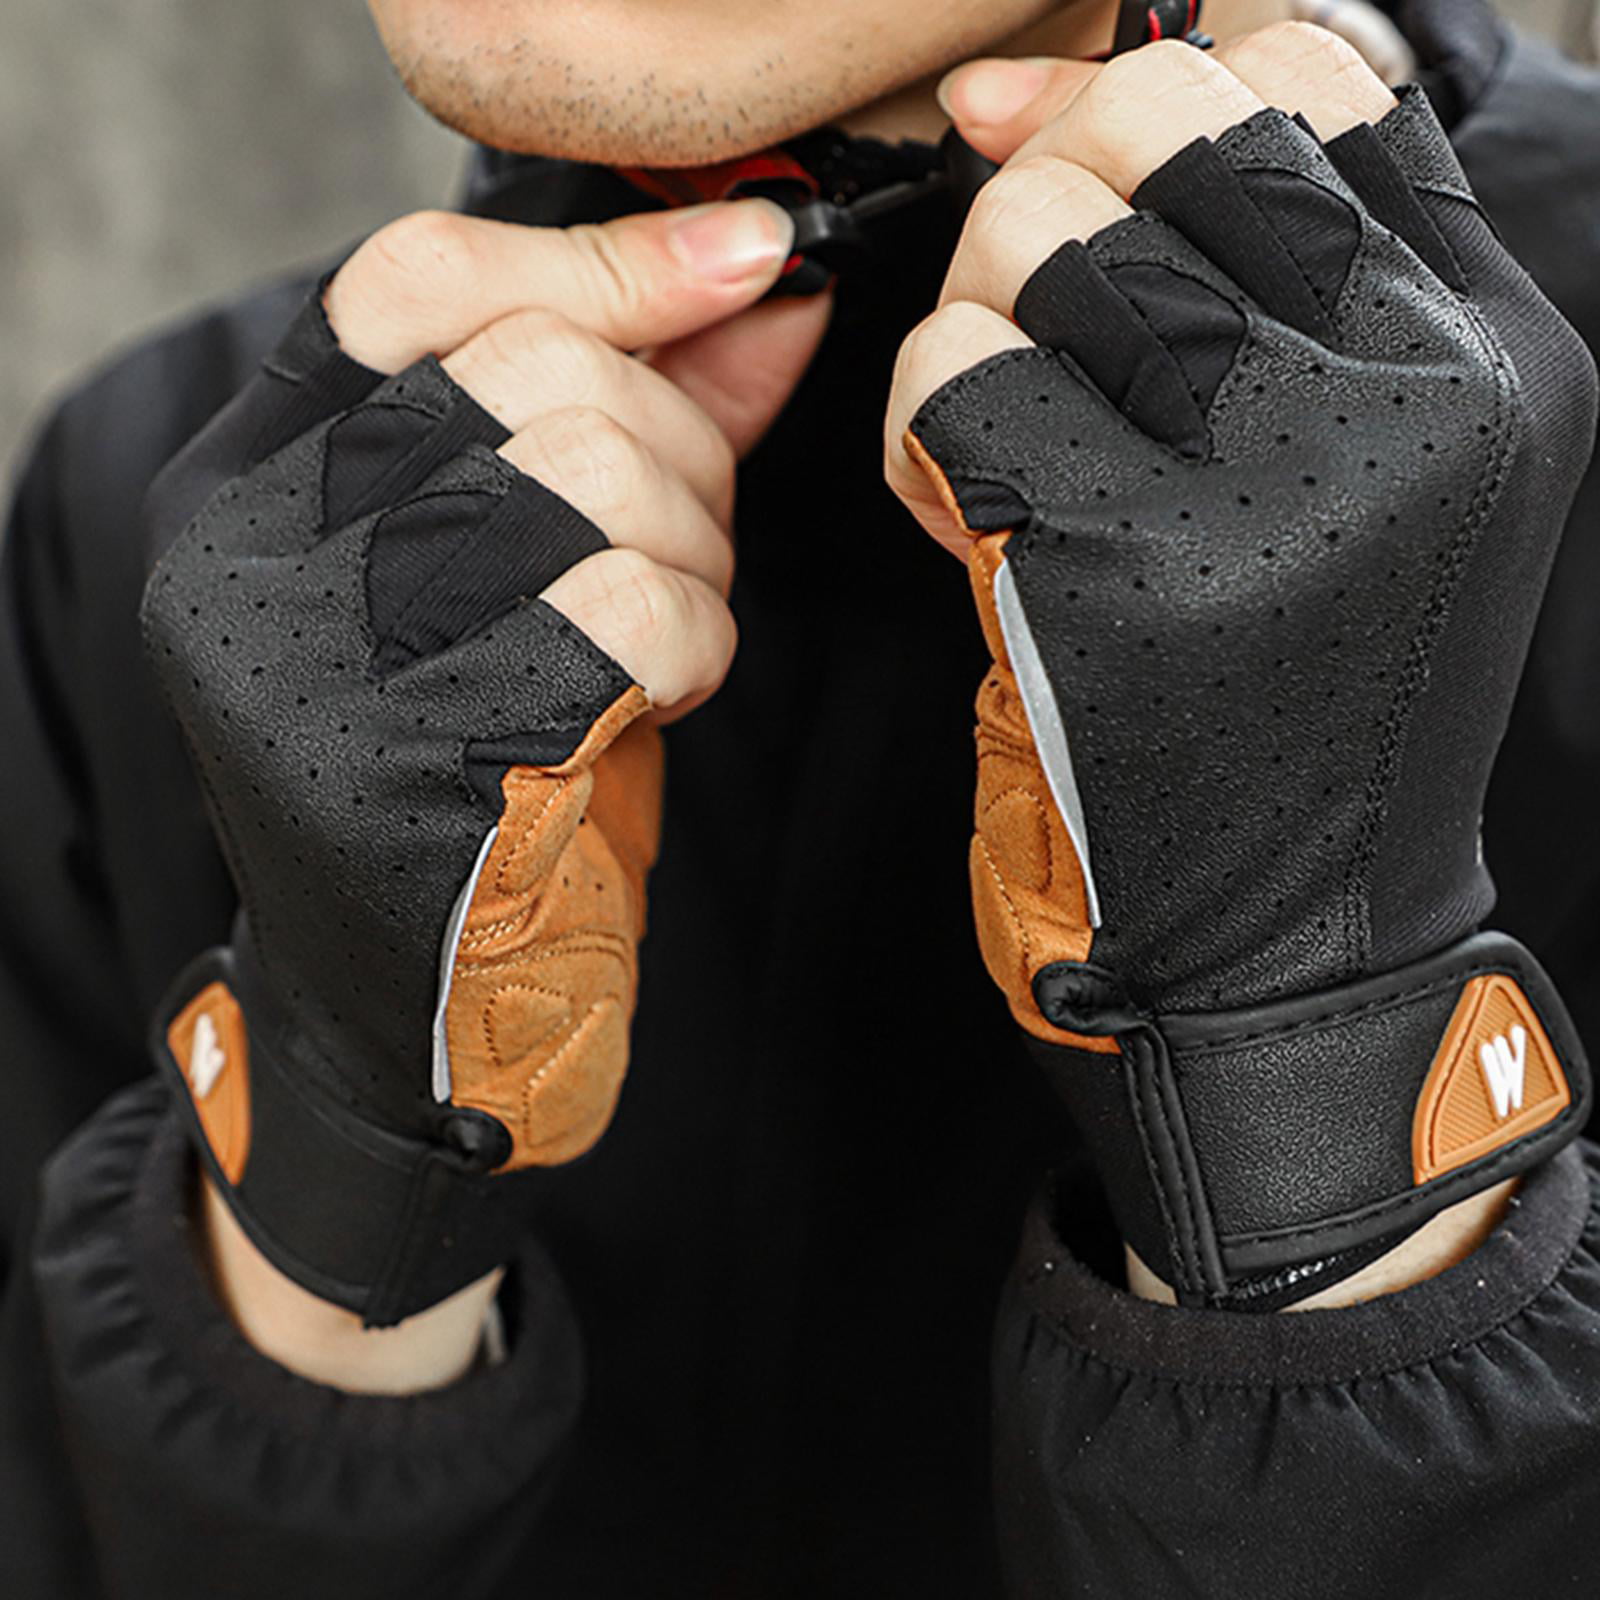 Details about   Cycling Gloves Luxury Leather Half Finger bicycle Glove Spandex Back Padded Palm 